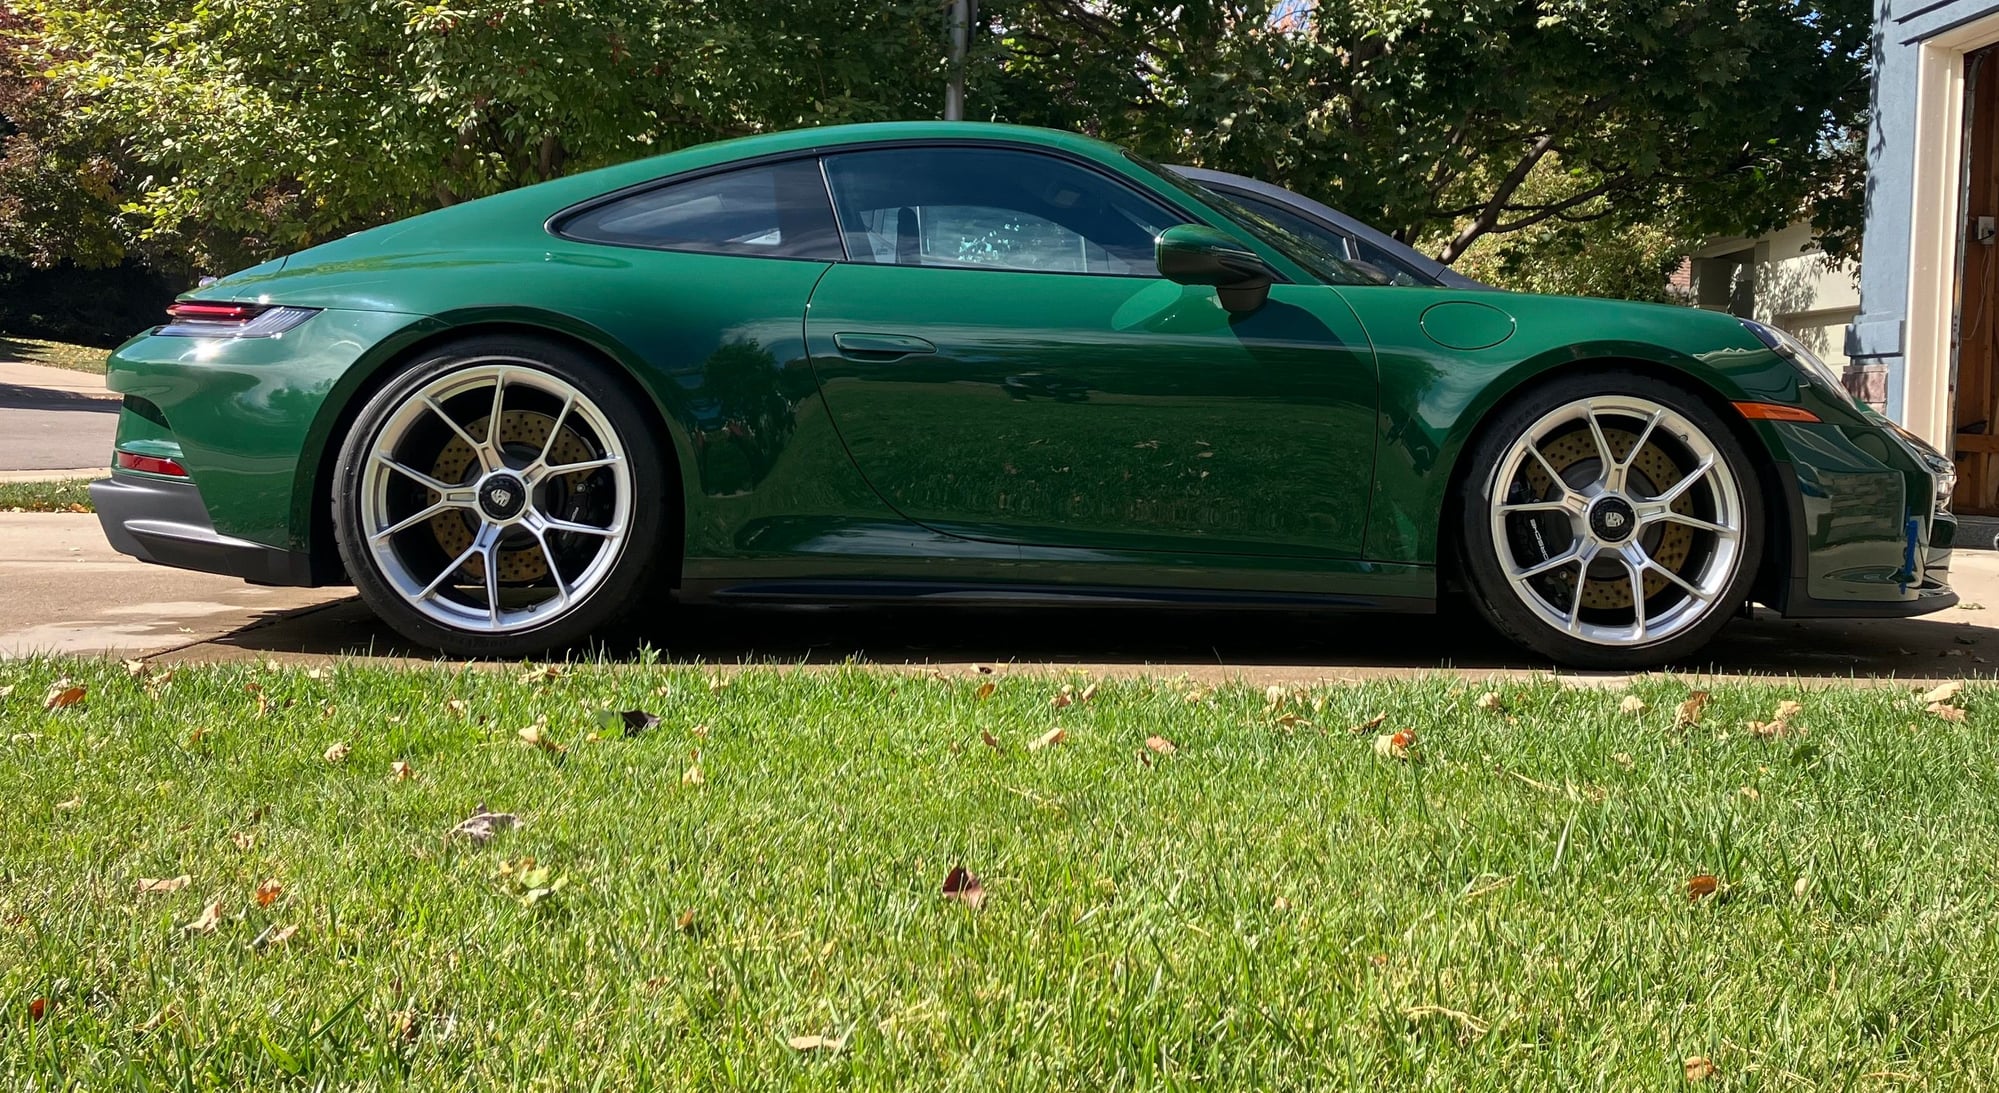 2022 Porsche 911 - 2022 Porsche 911 GT3 Touring in British Racing Green (PTS) - Used - VIN WP0AC2A98NS271064 - 3,800 Miles - 6 cyl - 2WD - Manual - Coupe - Other - Boulder, CO 80304, United States